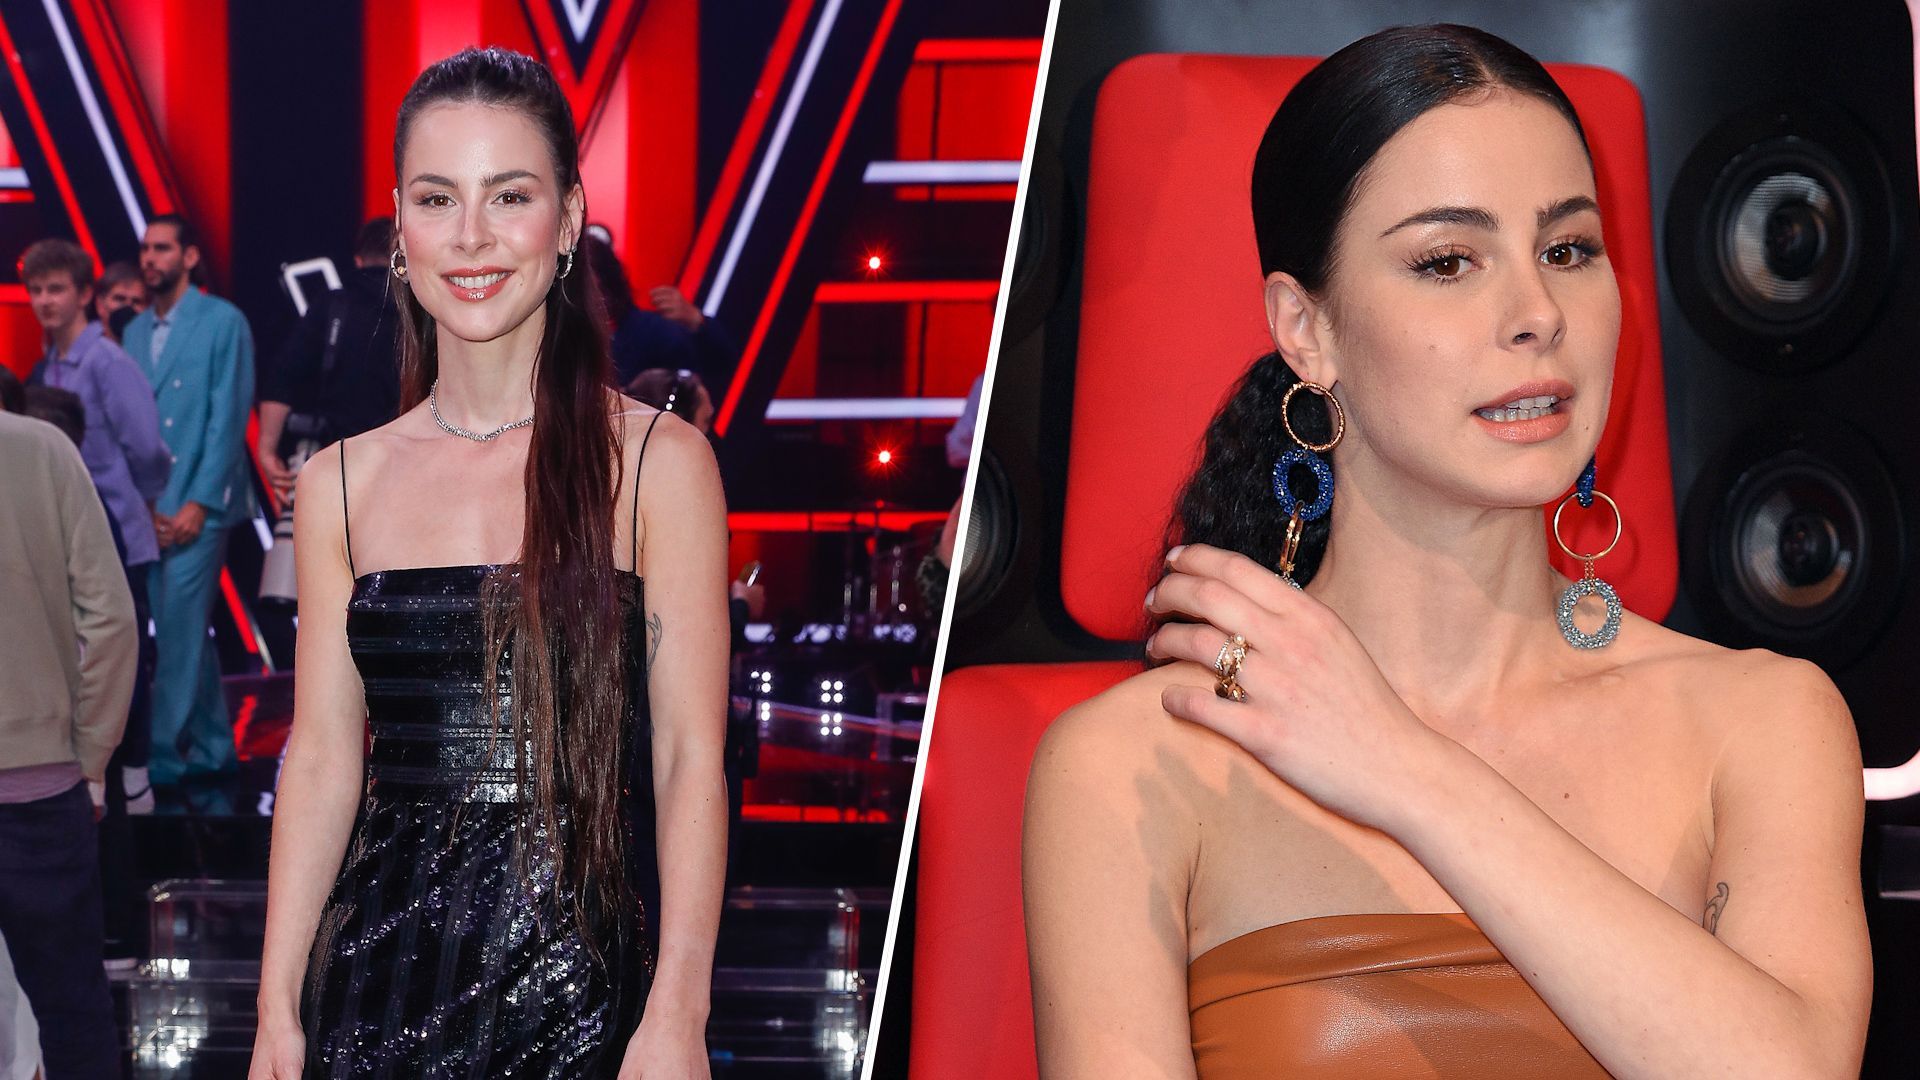 Refreshment: “The Voice Kids” judge Lena Meyer-Landrut relies on this snack during breaks